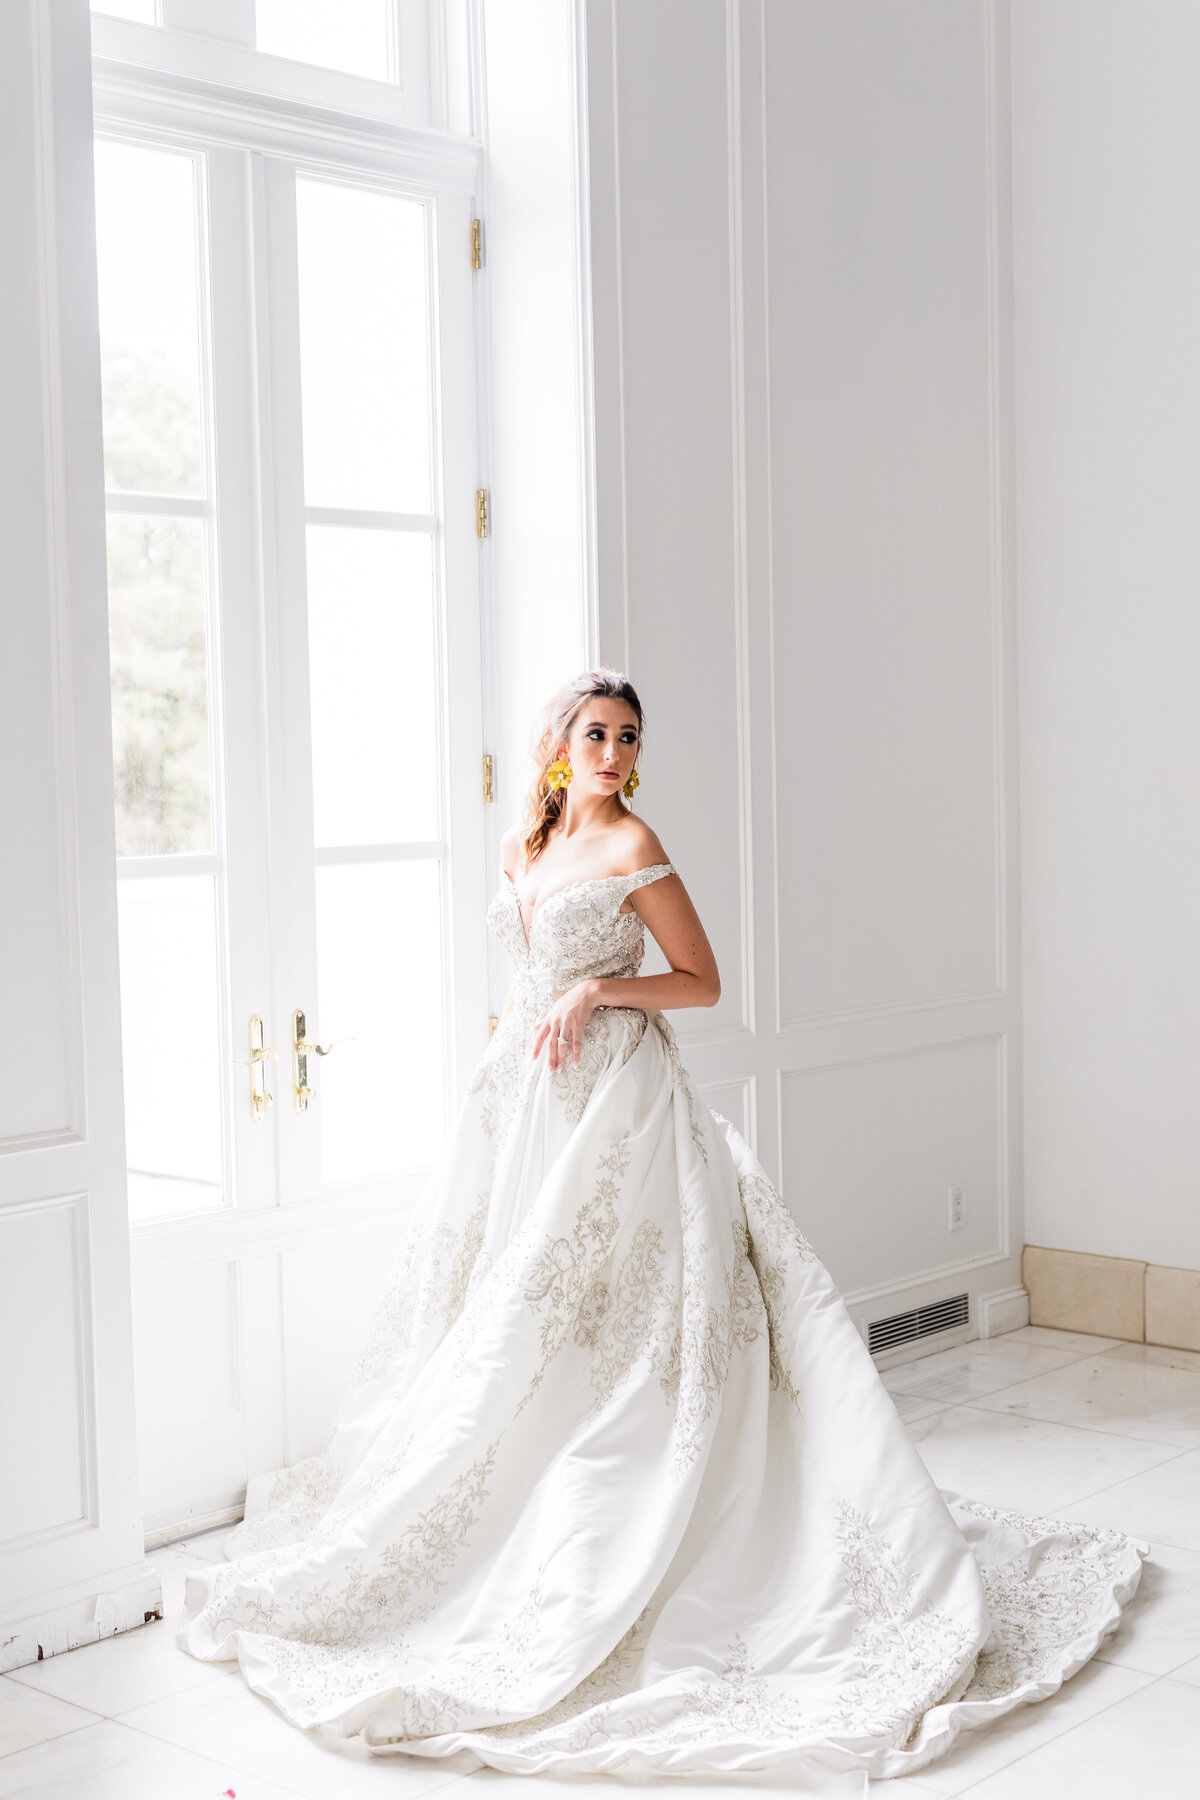 Light and Airy Luxury Bridal Photos